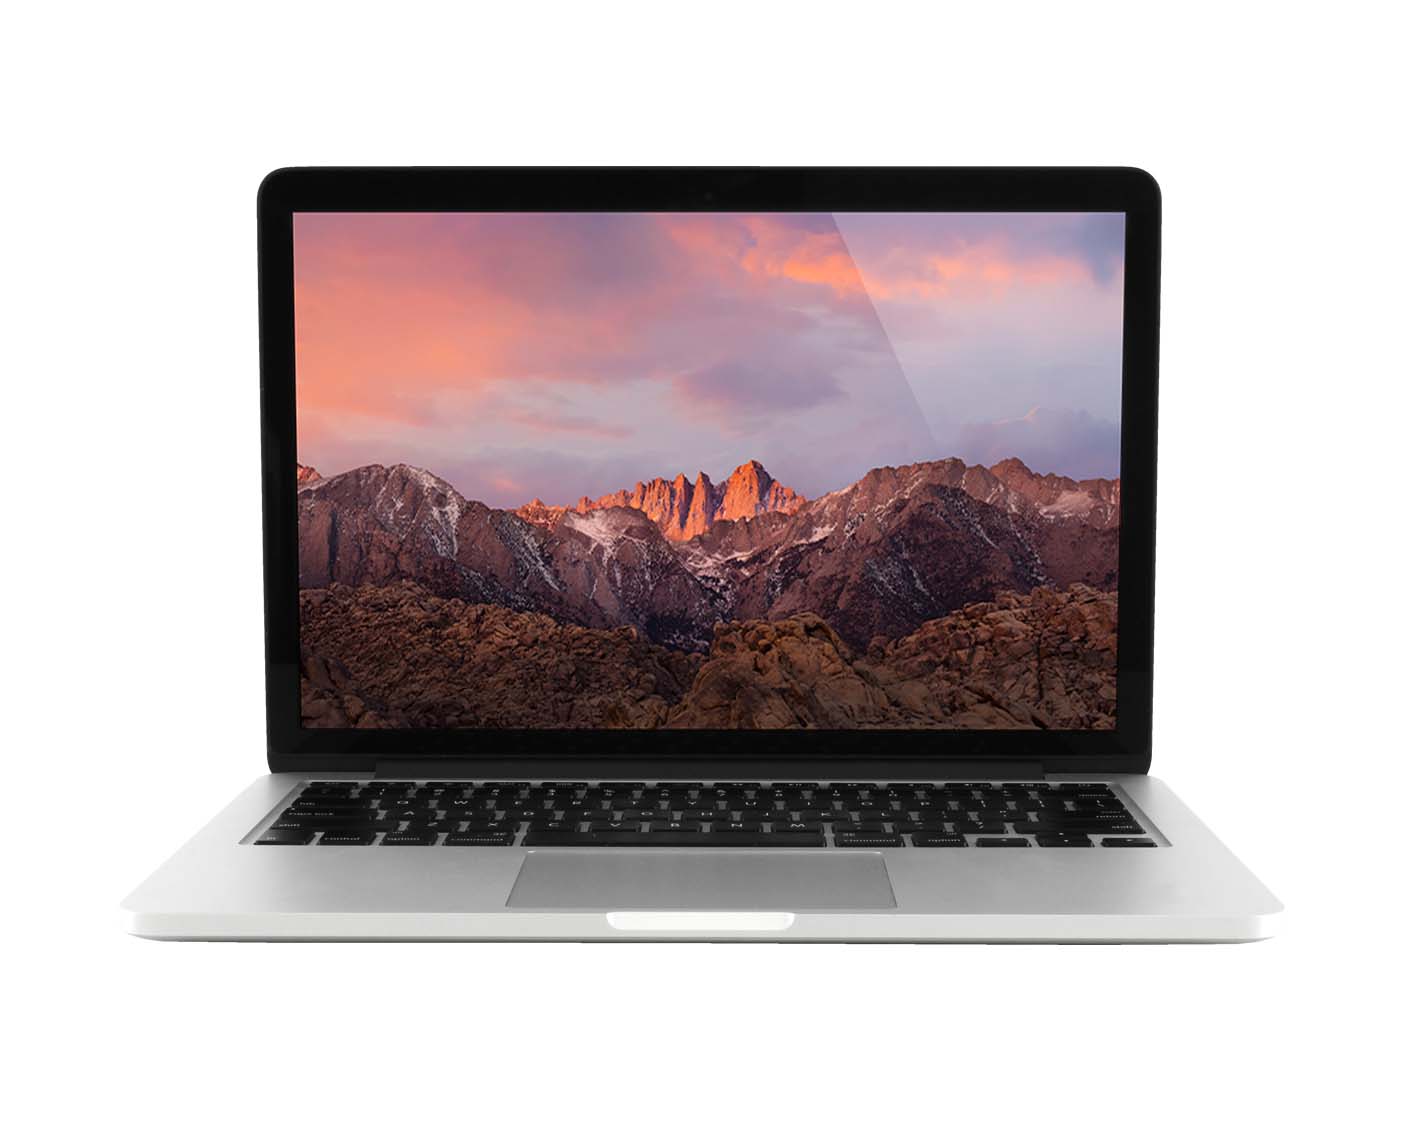 MacBook Pro (Retina, 13-inch, Early 2015 - タブレット